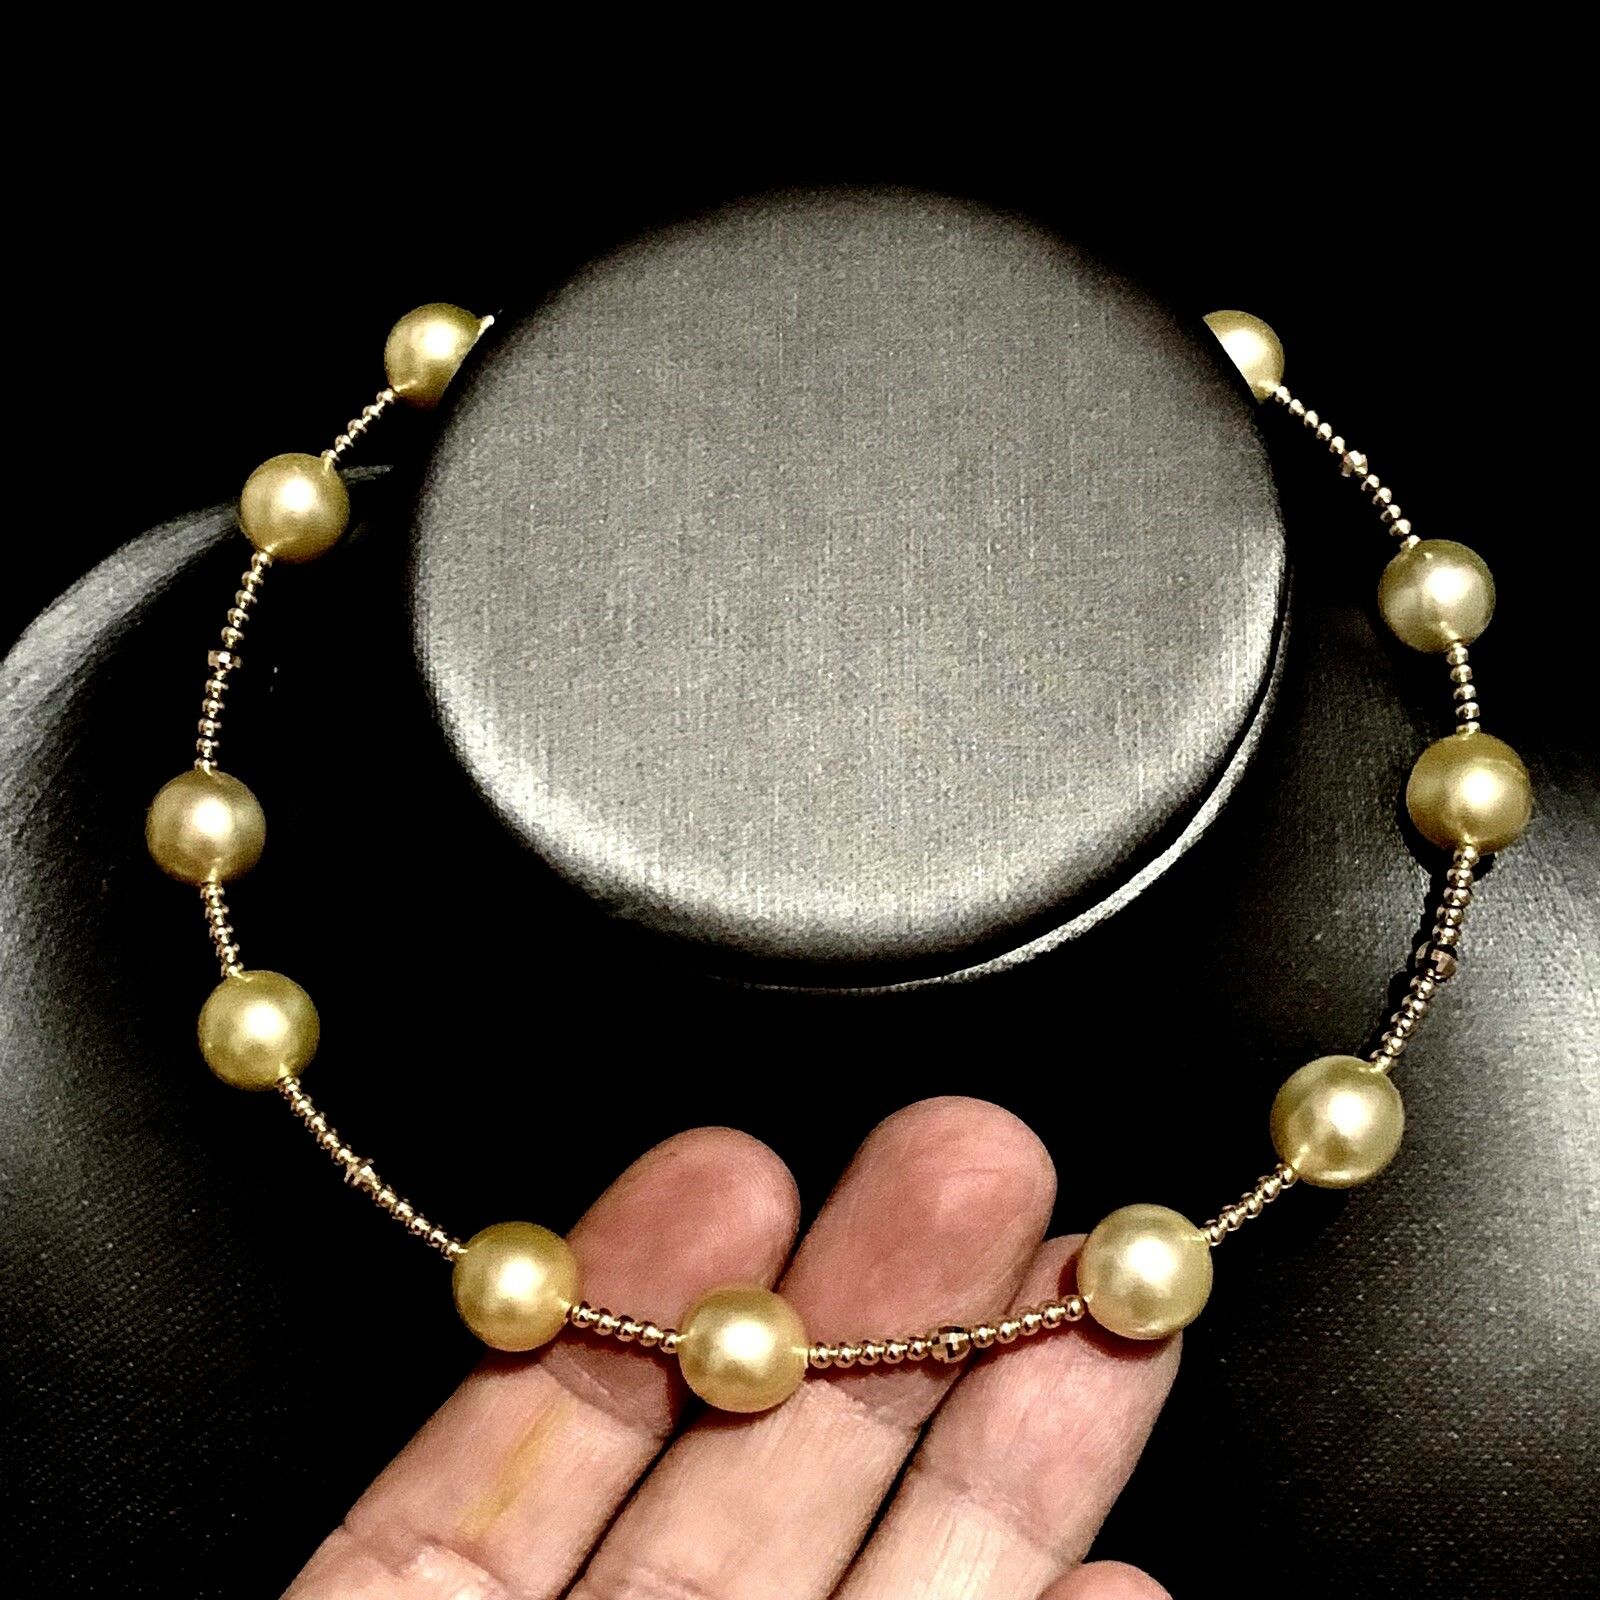 South Sea Pearl Choker Necklace 14k Gold 11.50 mm Italy Certified $3,450 820422 - Certified Fine Jewelry